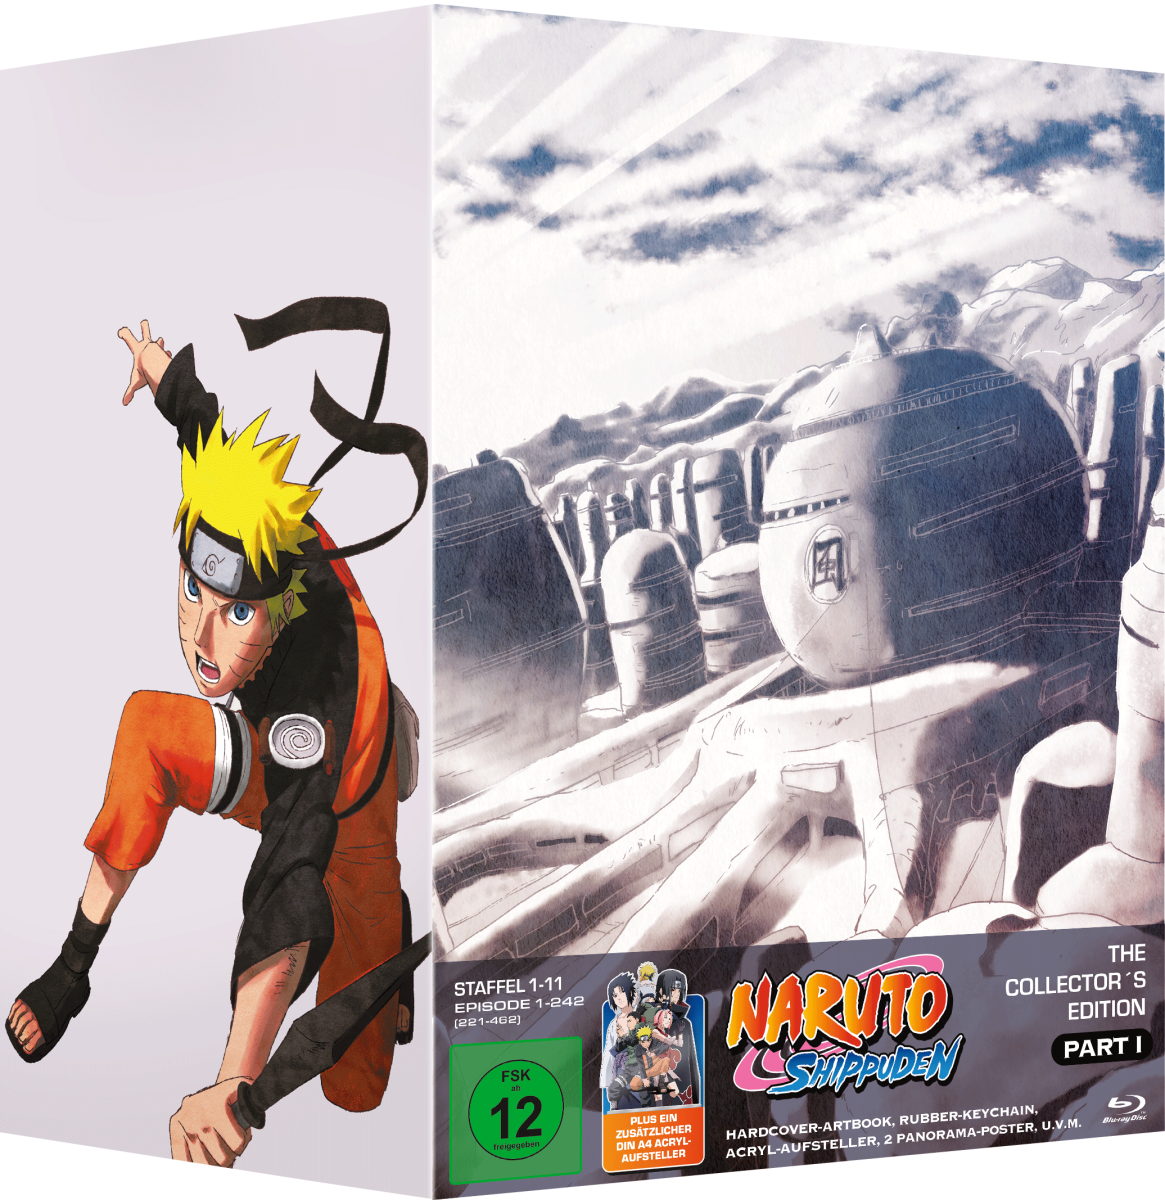 Naruto Shippuden - Collector's Edition Part 1 [Blu-ray] Cover